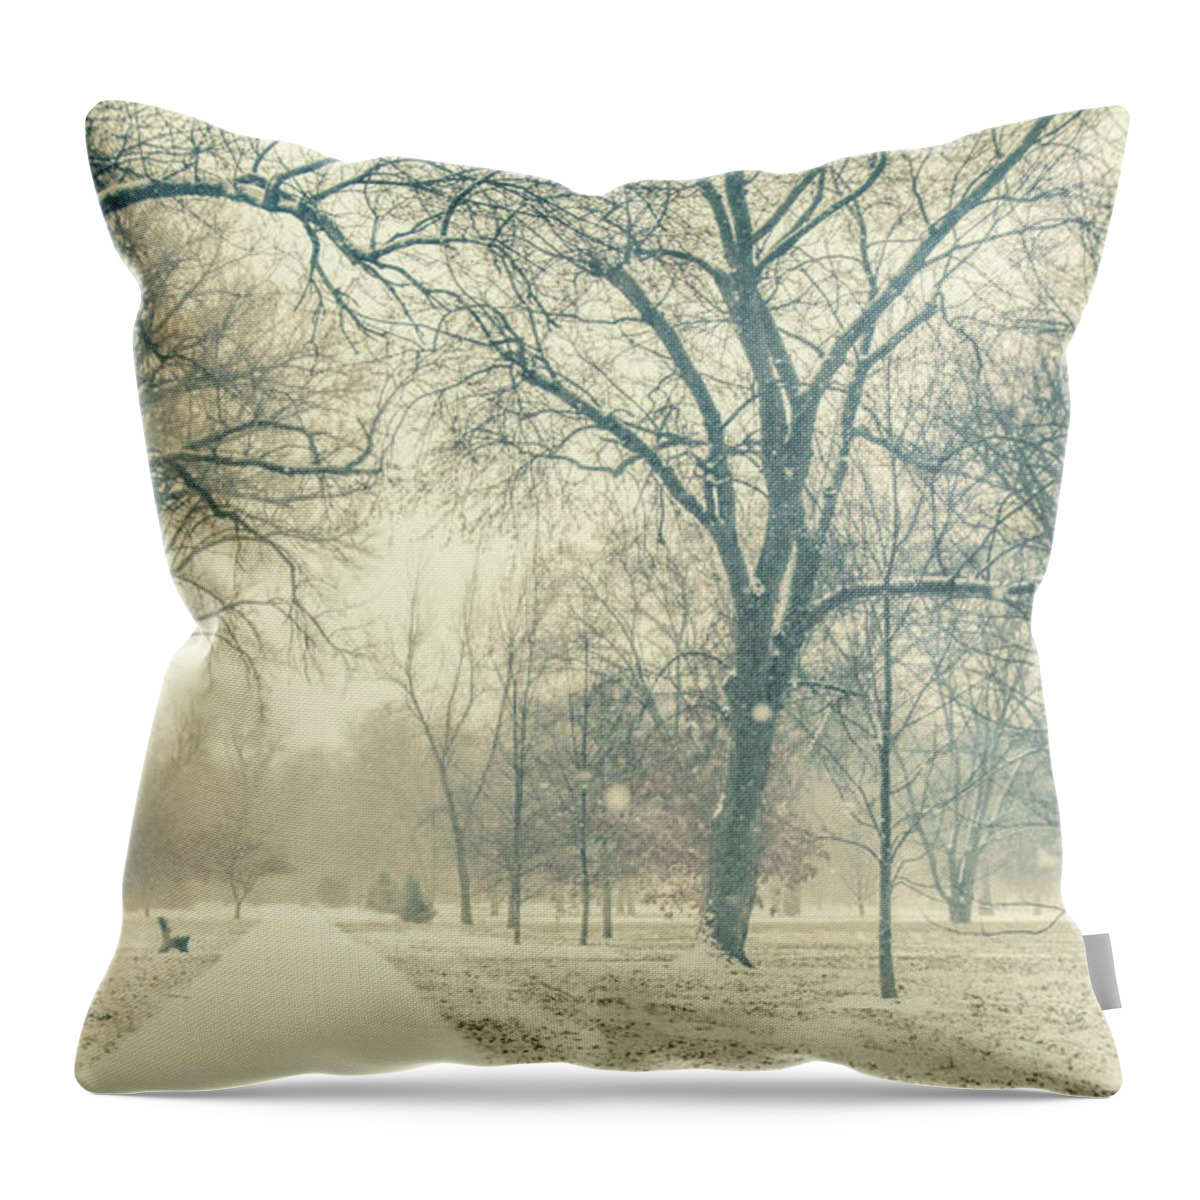 Snow Throw Pillow featuring the photograph Snow Day by Pam Holdsworth